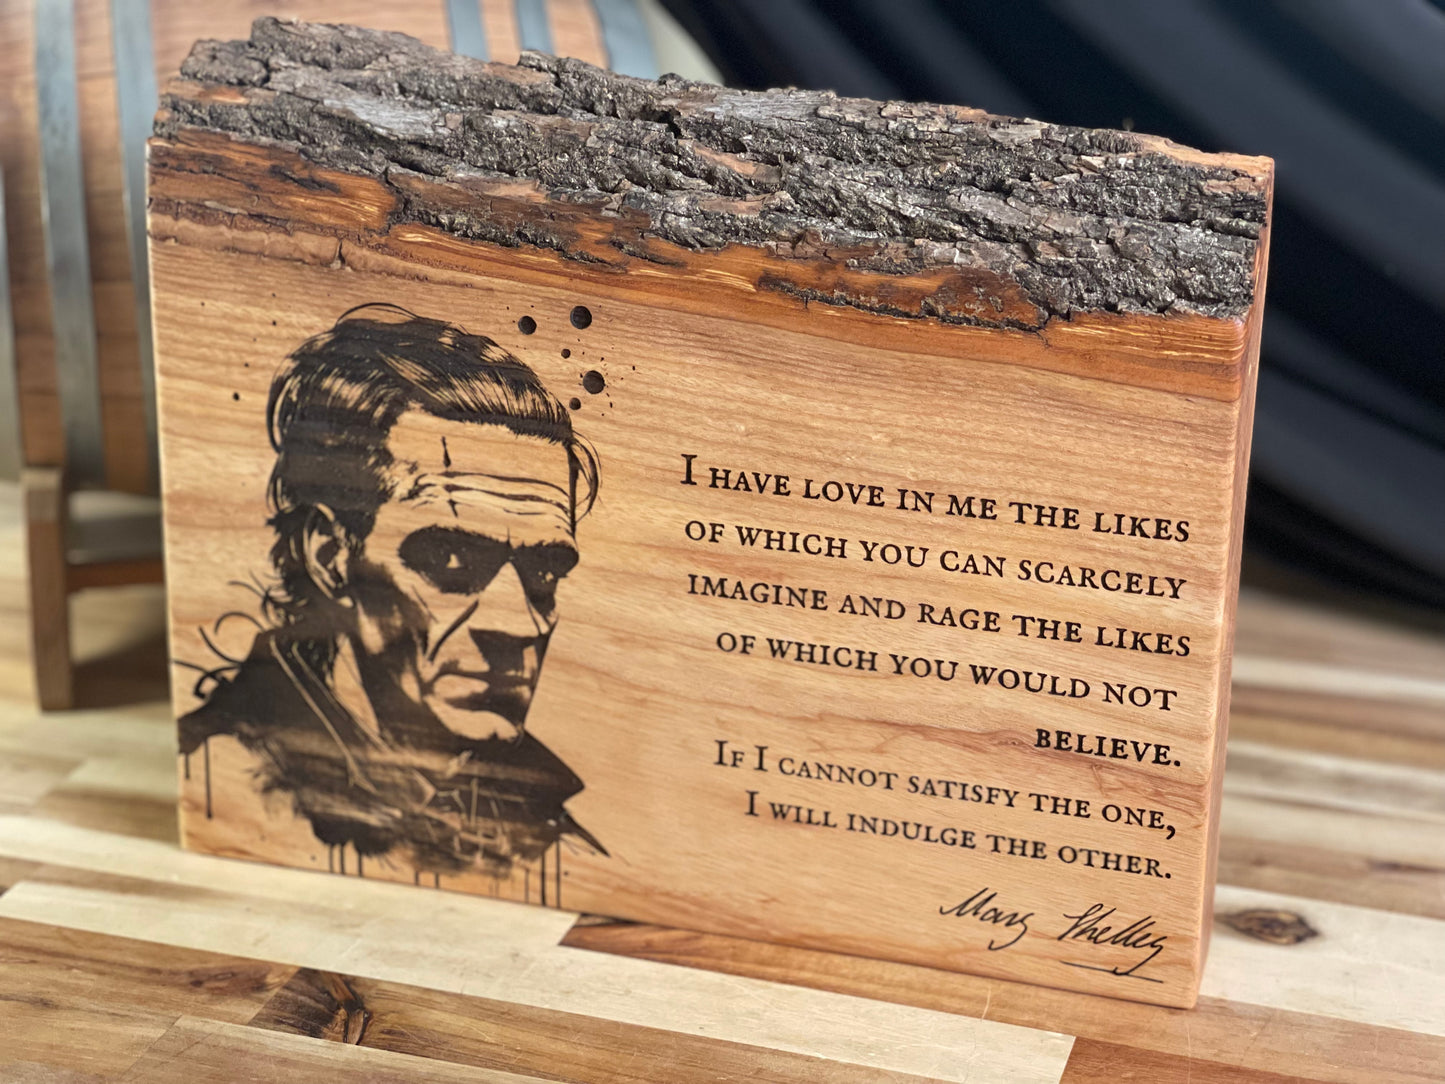 Indulge the other: Mary Shelley quote